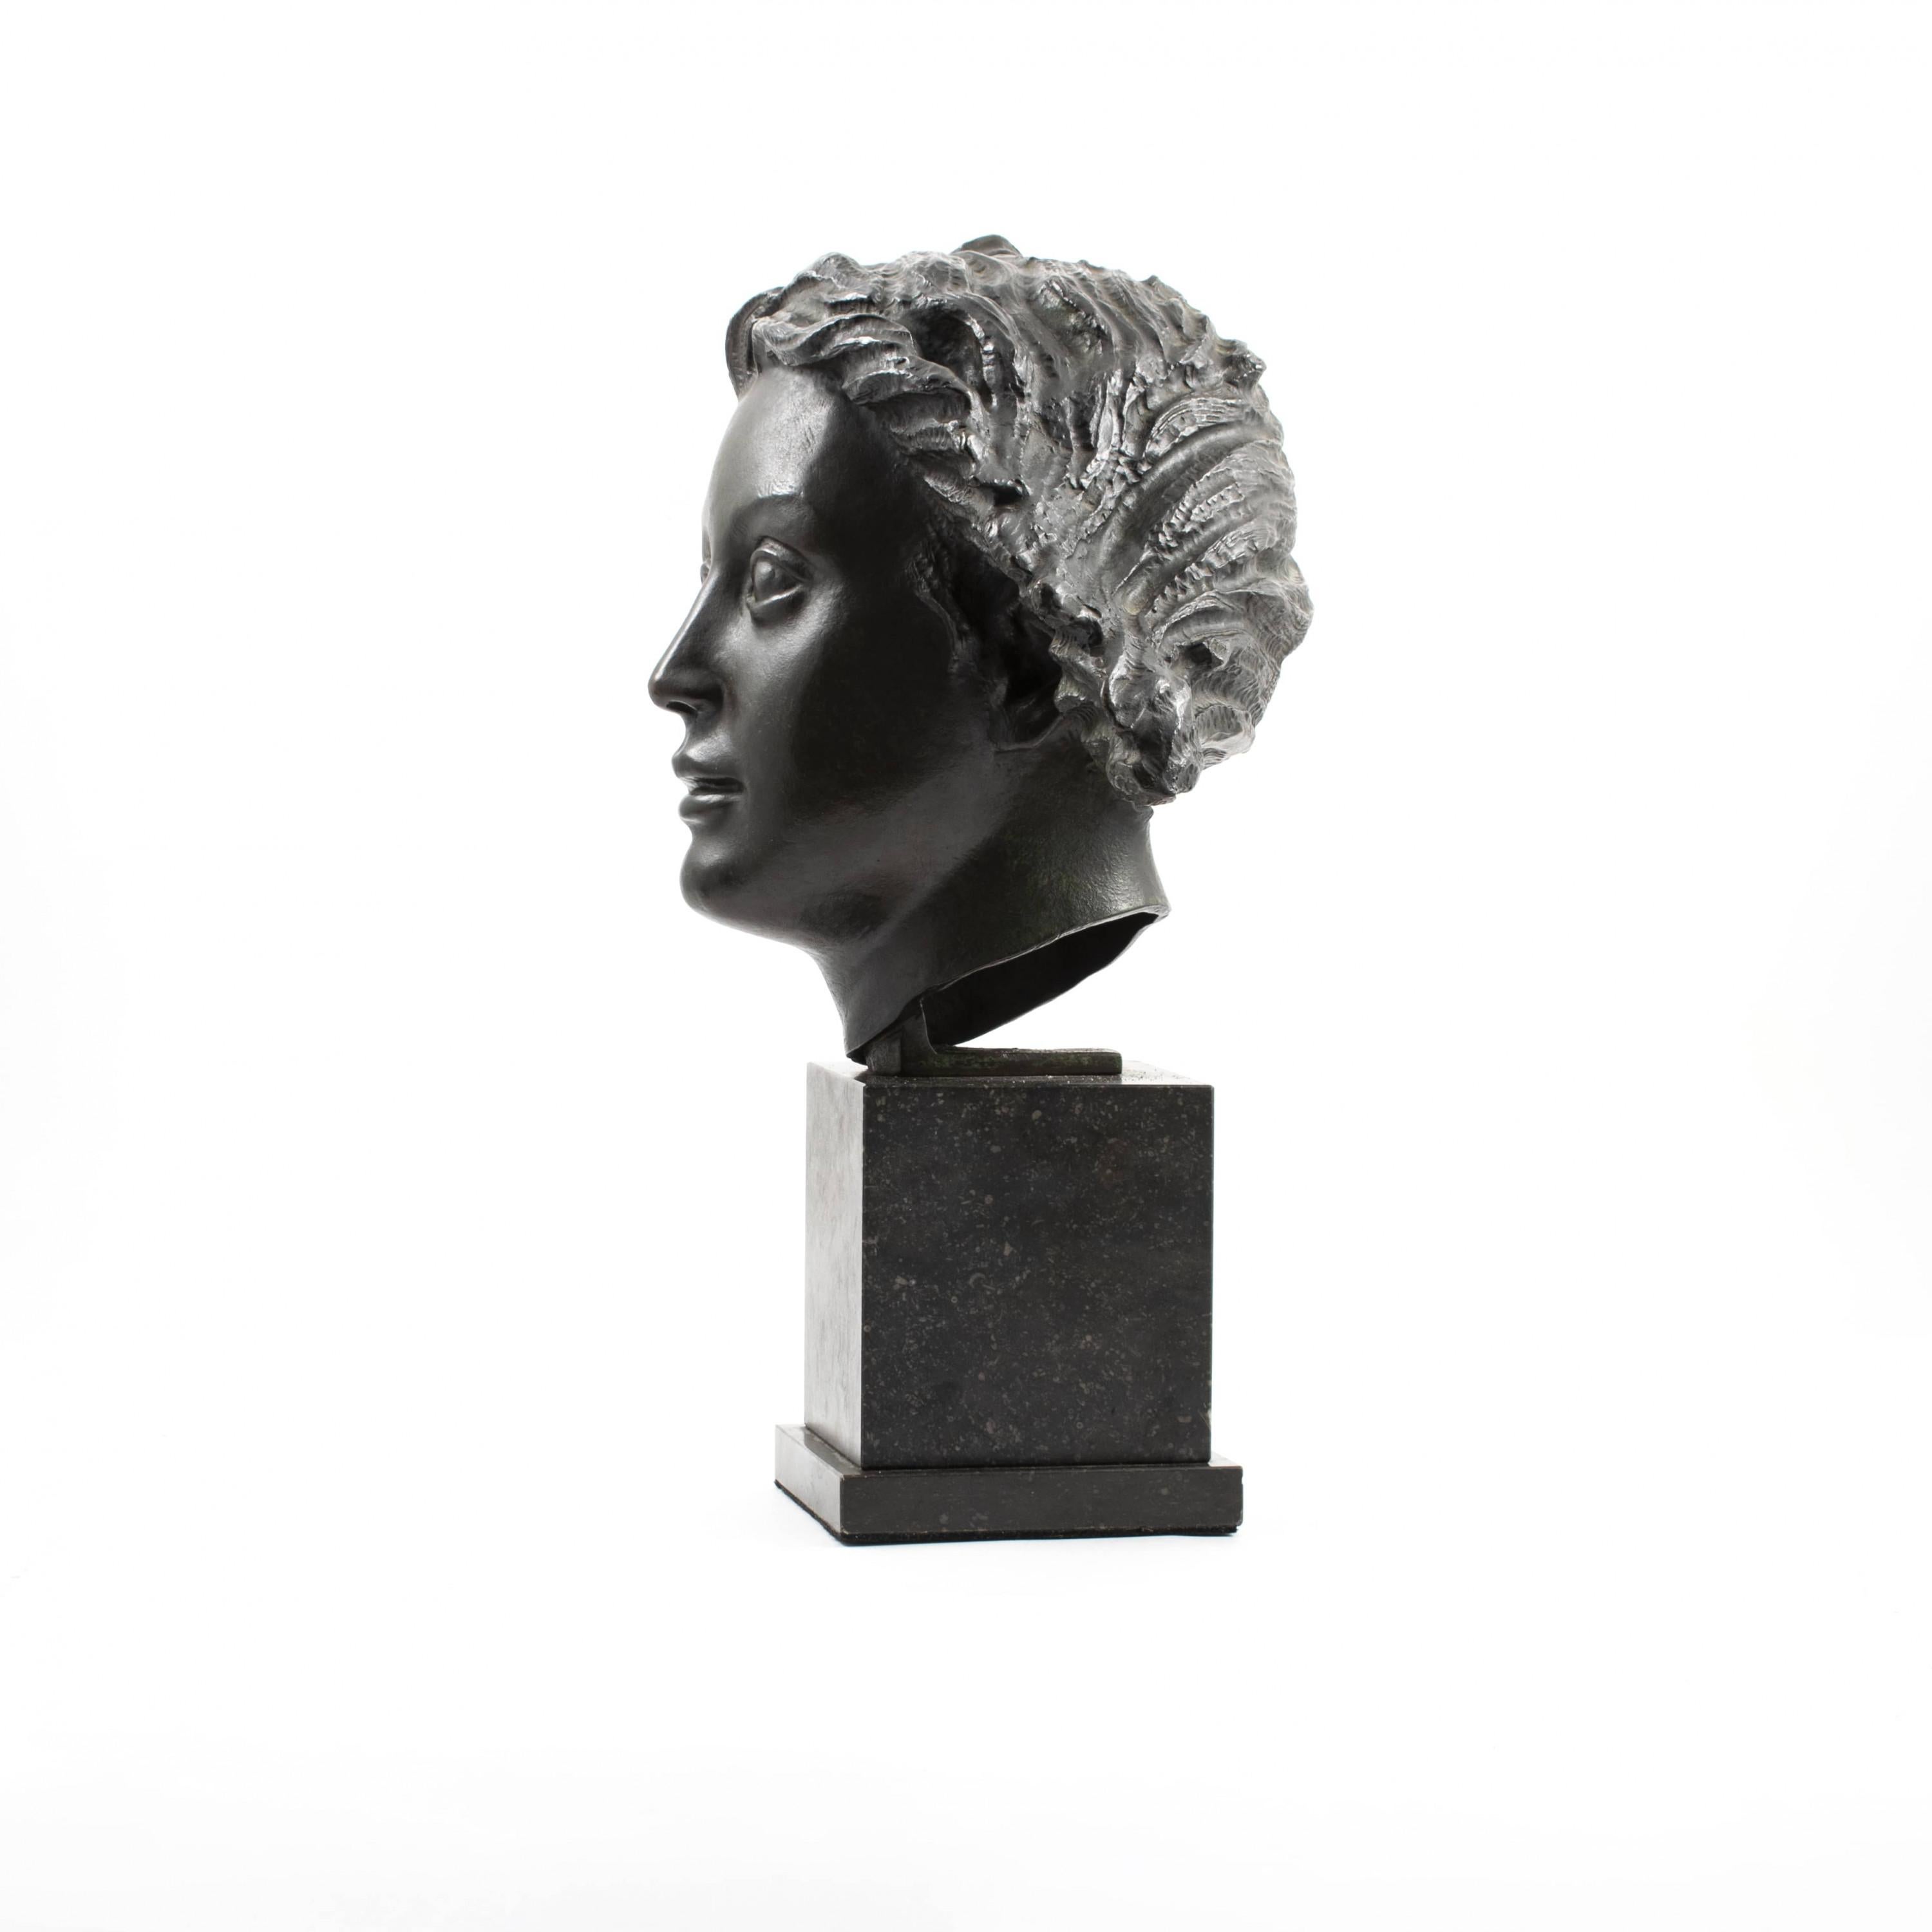 Johannes C. Bjerg 1886-1955.
Dark patinated bronze head of the Greek Goddess Artemis mounted on a black marble base.
Stamp from bronze caster L. Rasmussen. Unsigned

1934. Casting of the head for the Artemis fountain, which stands in the middle